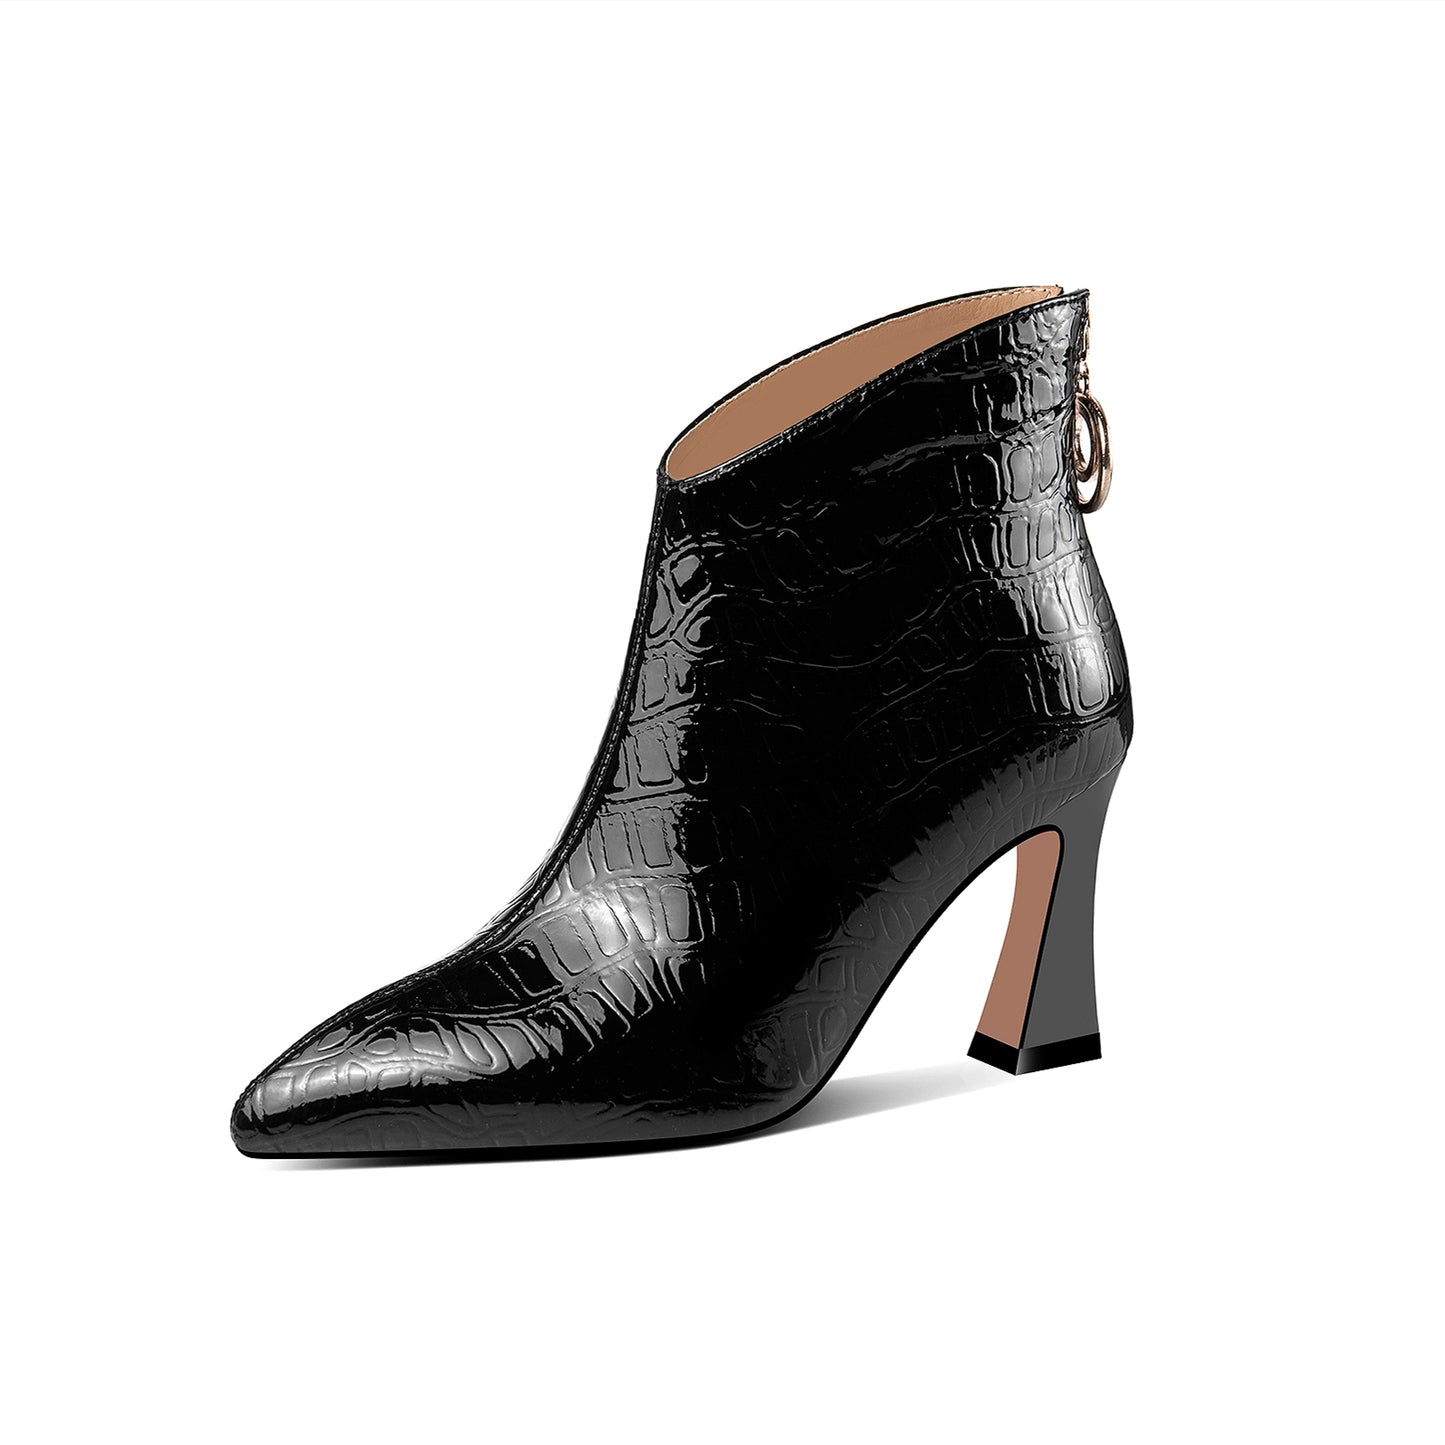 TinaCus Patent Leather Women's Handmade Pointed Toe High Spool Heel Ring Zip Puller Ankle Boots